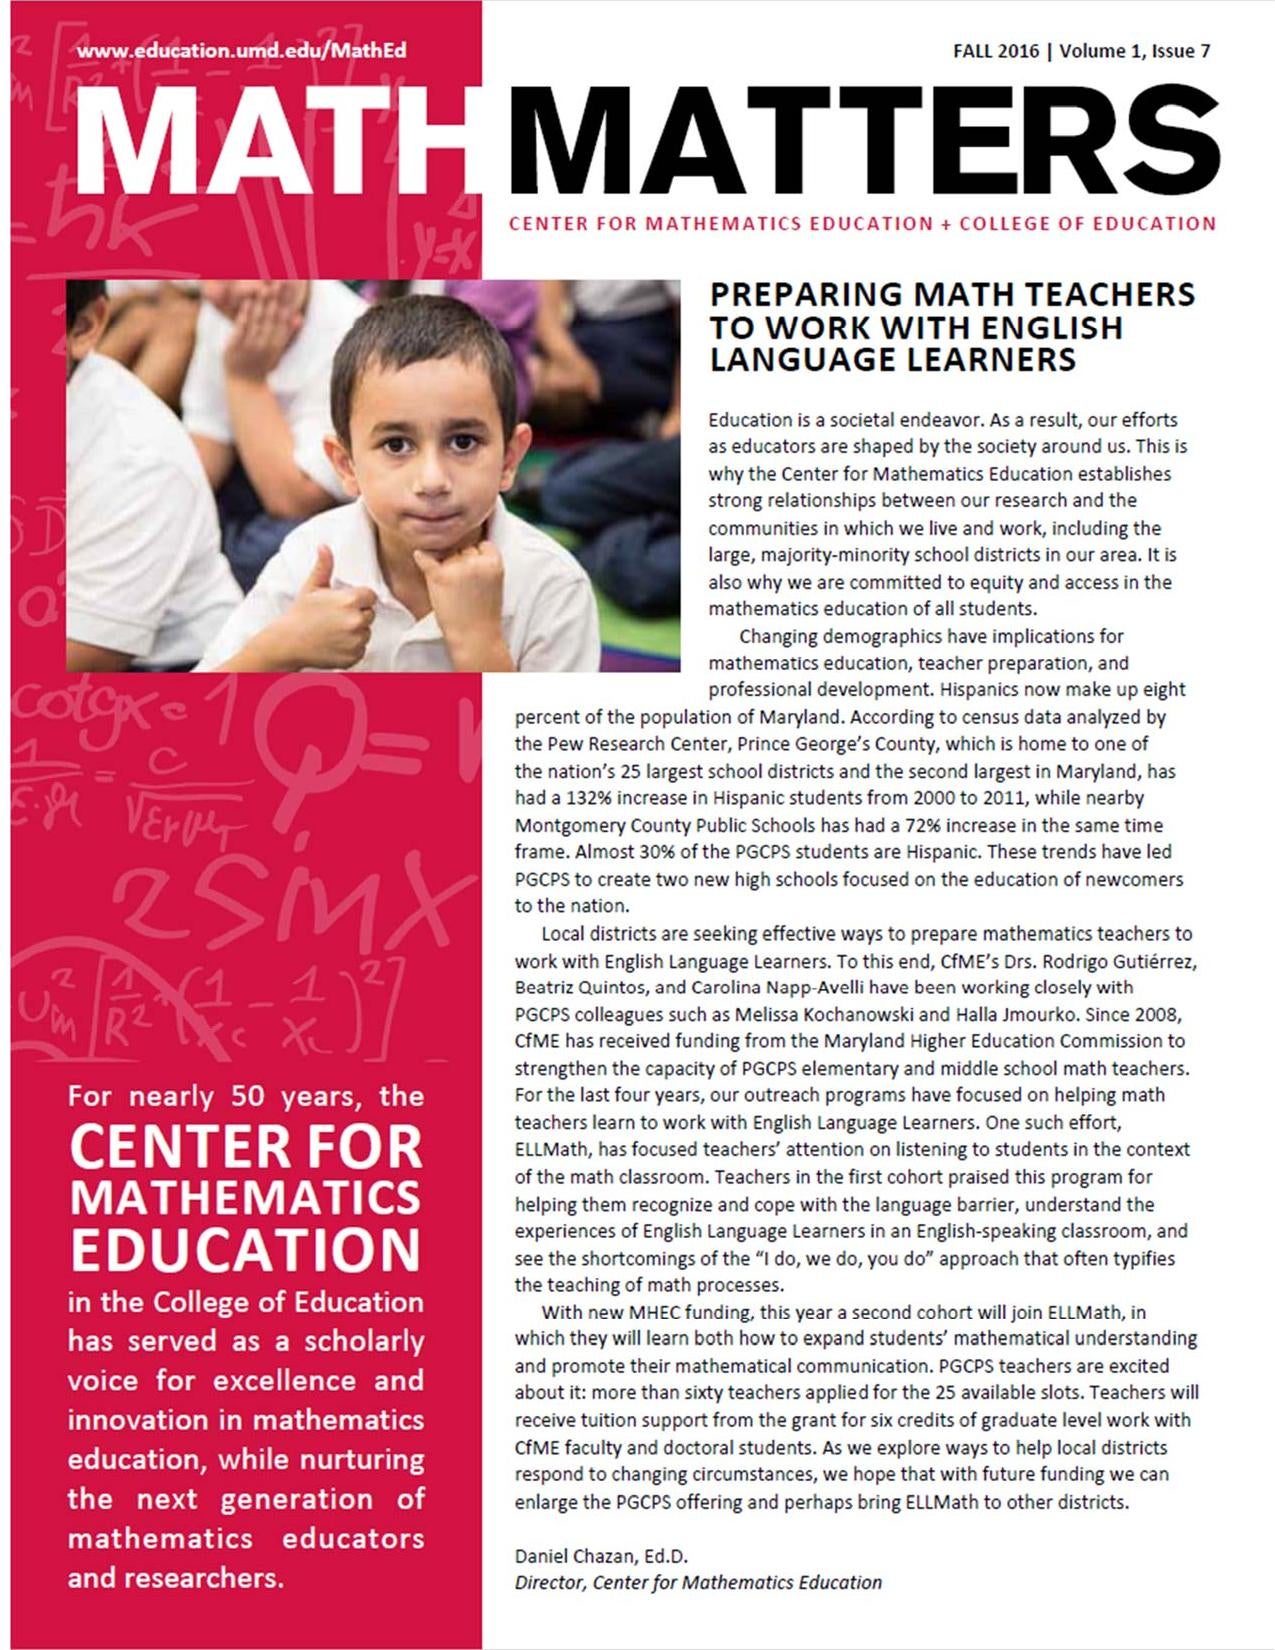 MathMatters Fall 2016_Front Cover.